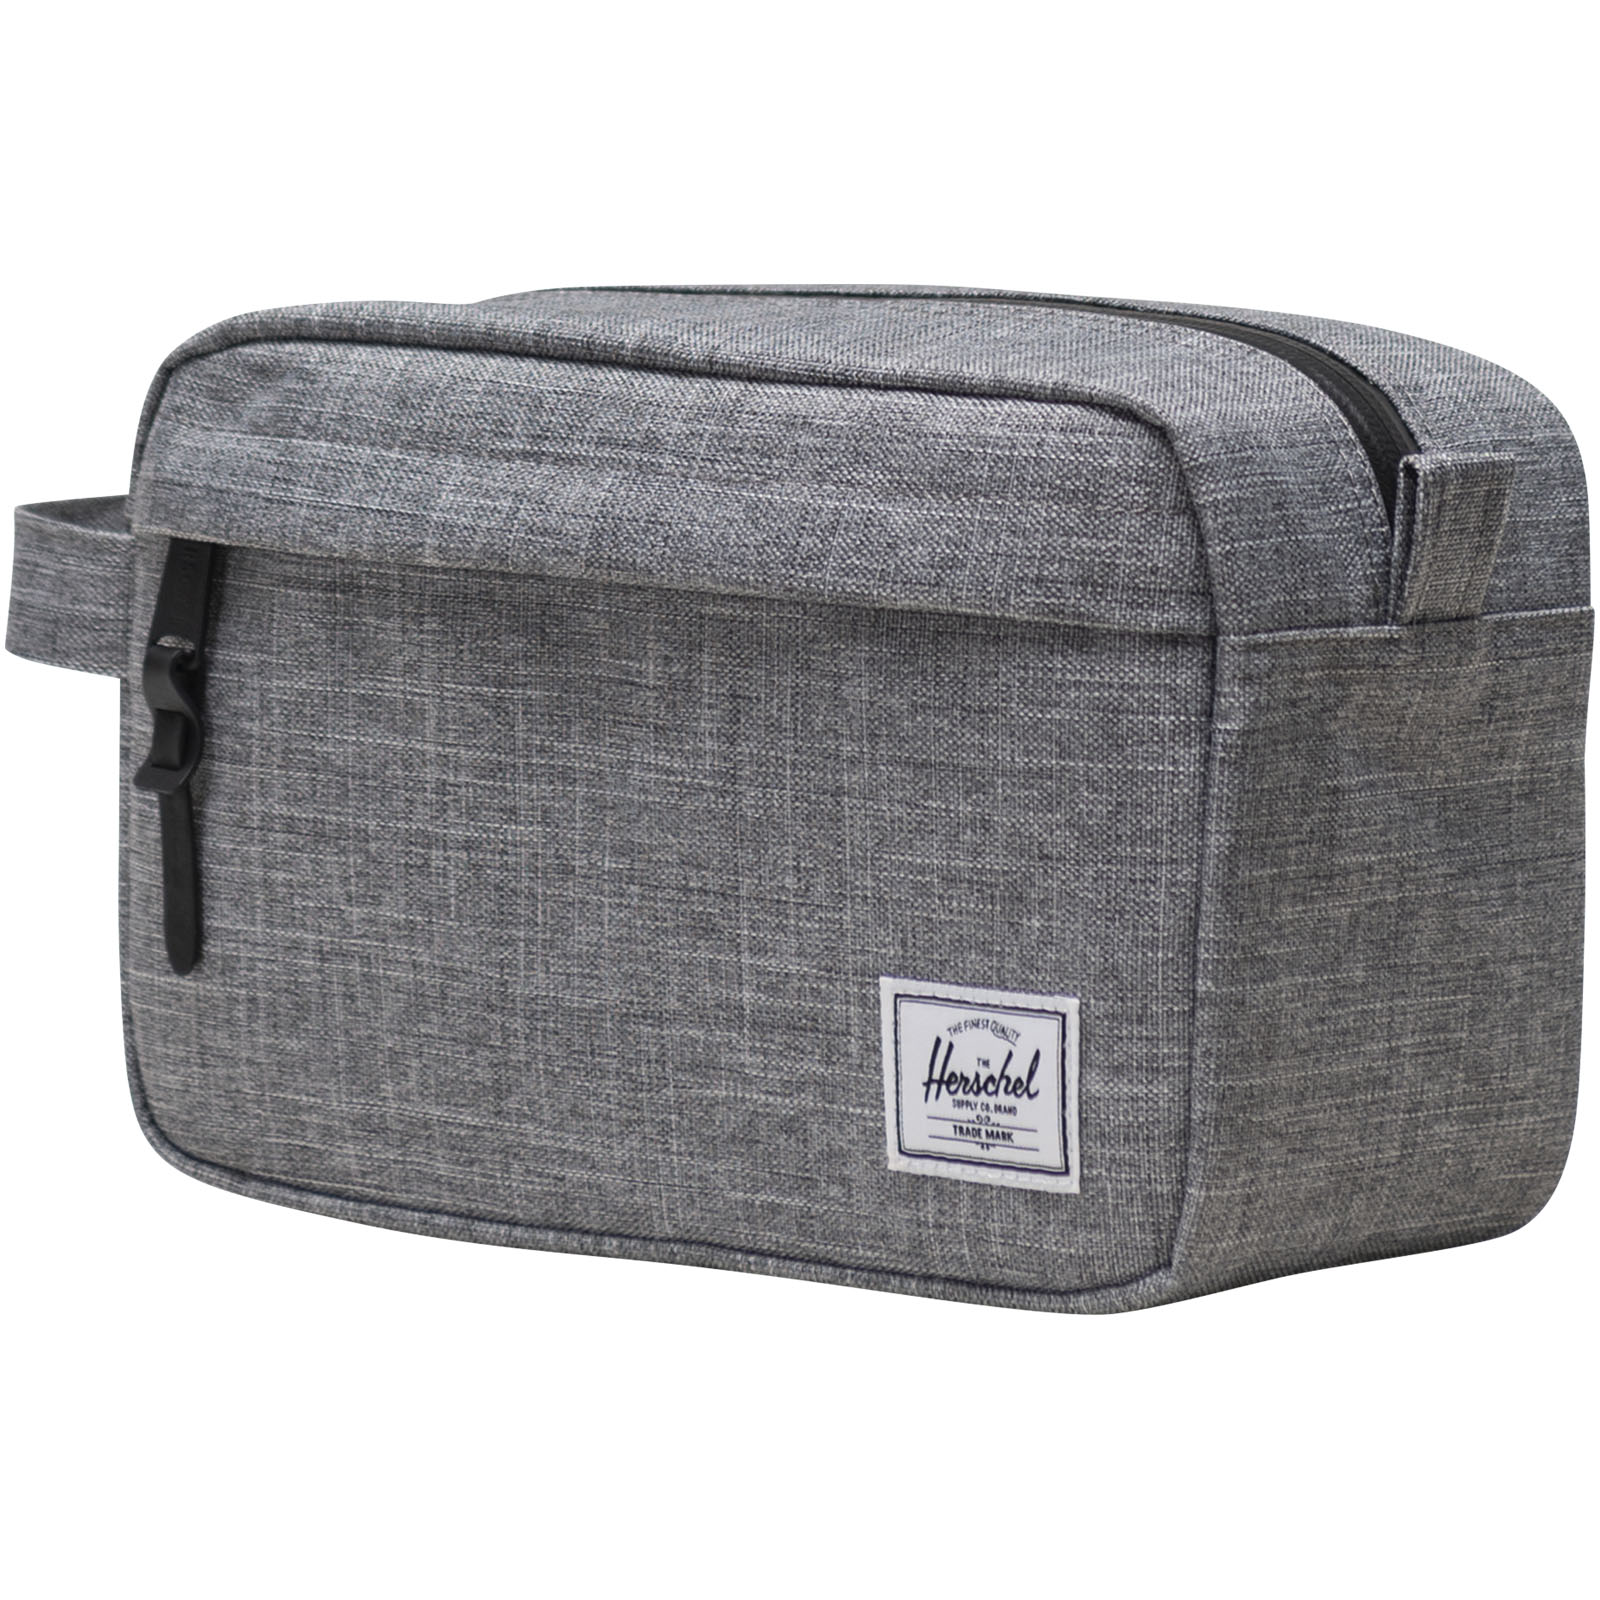 Advertising Toiletry Bags - Herschel Chapter recycled travel kit - 0